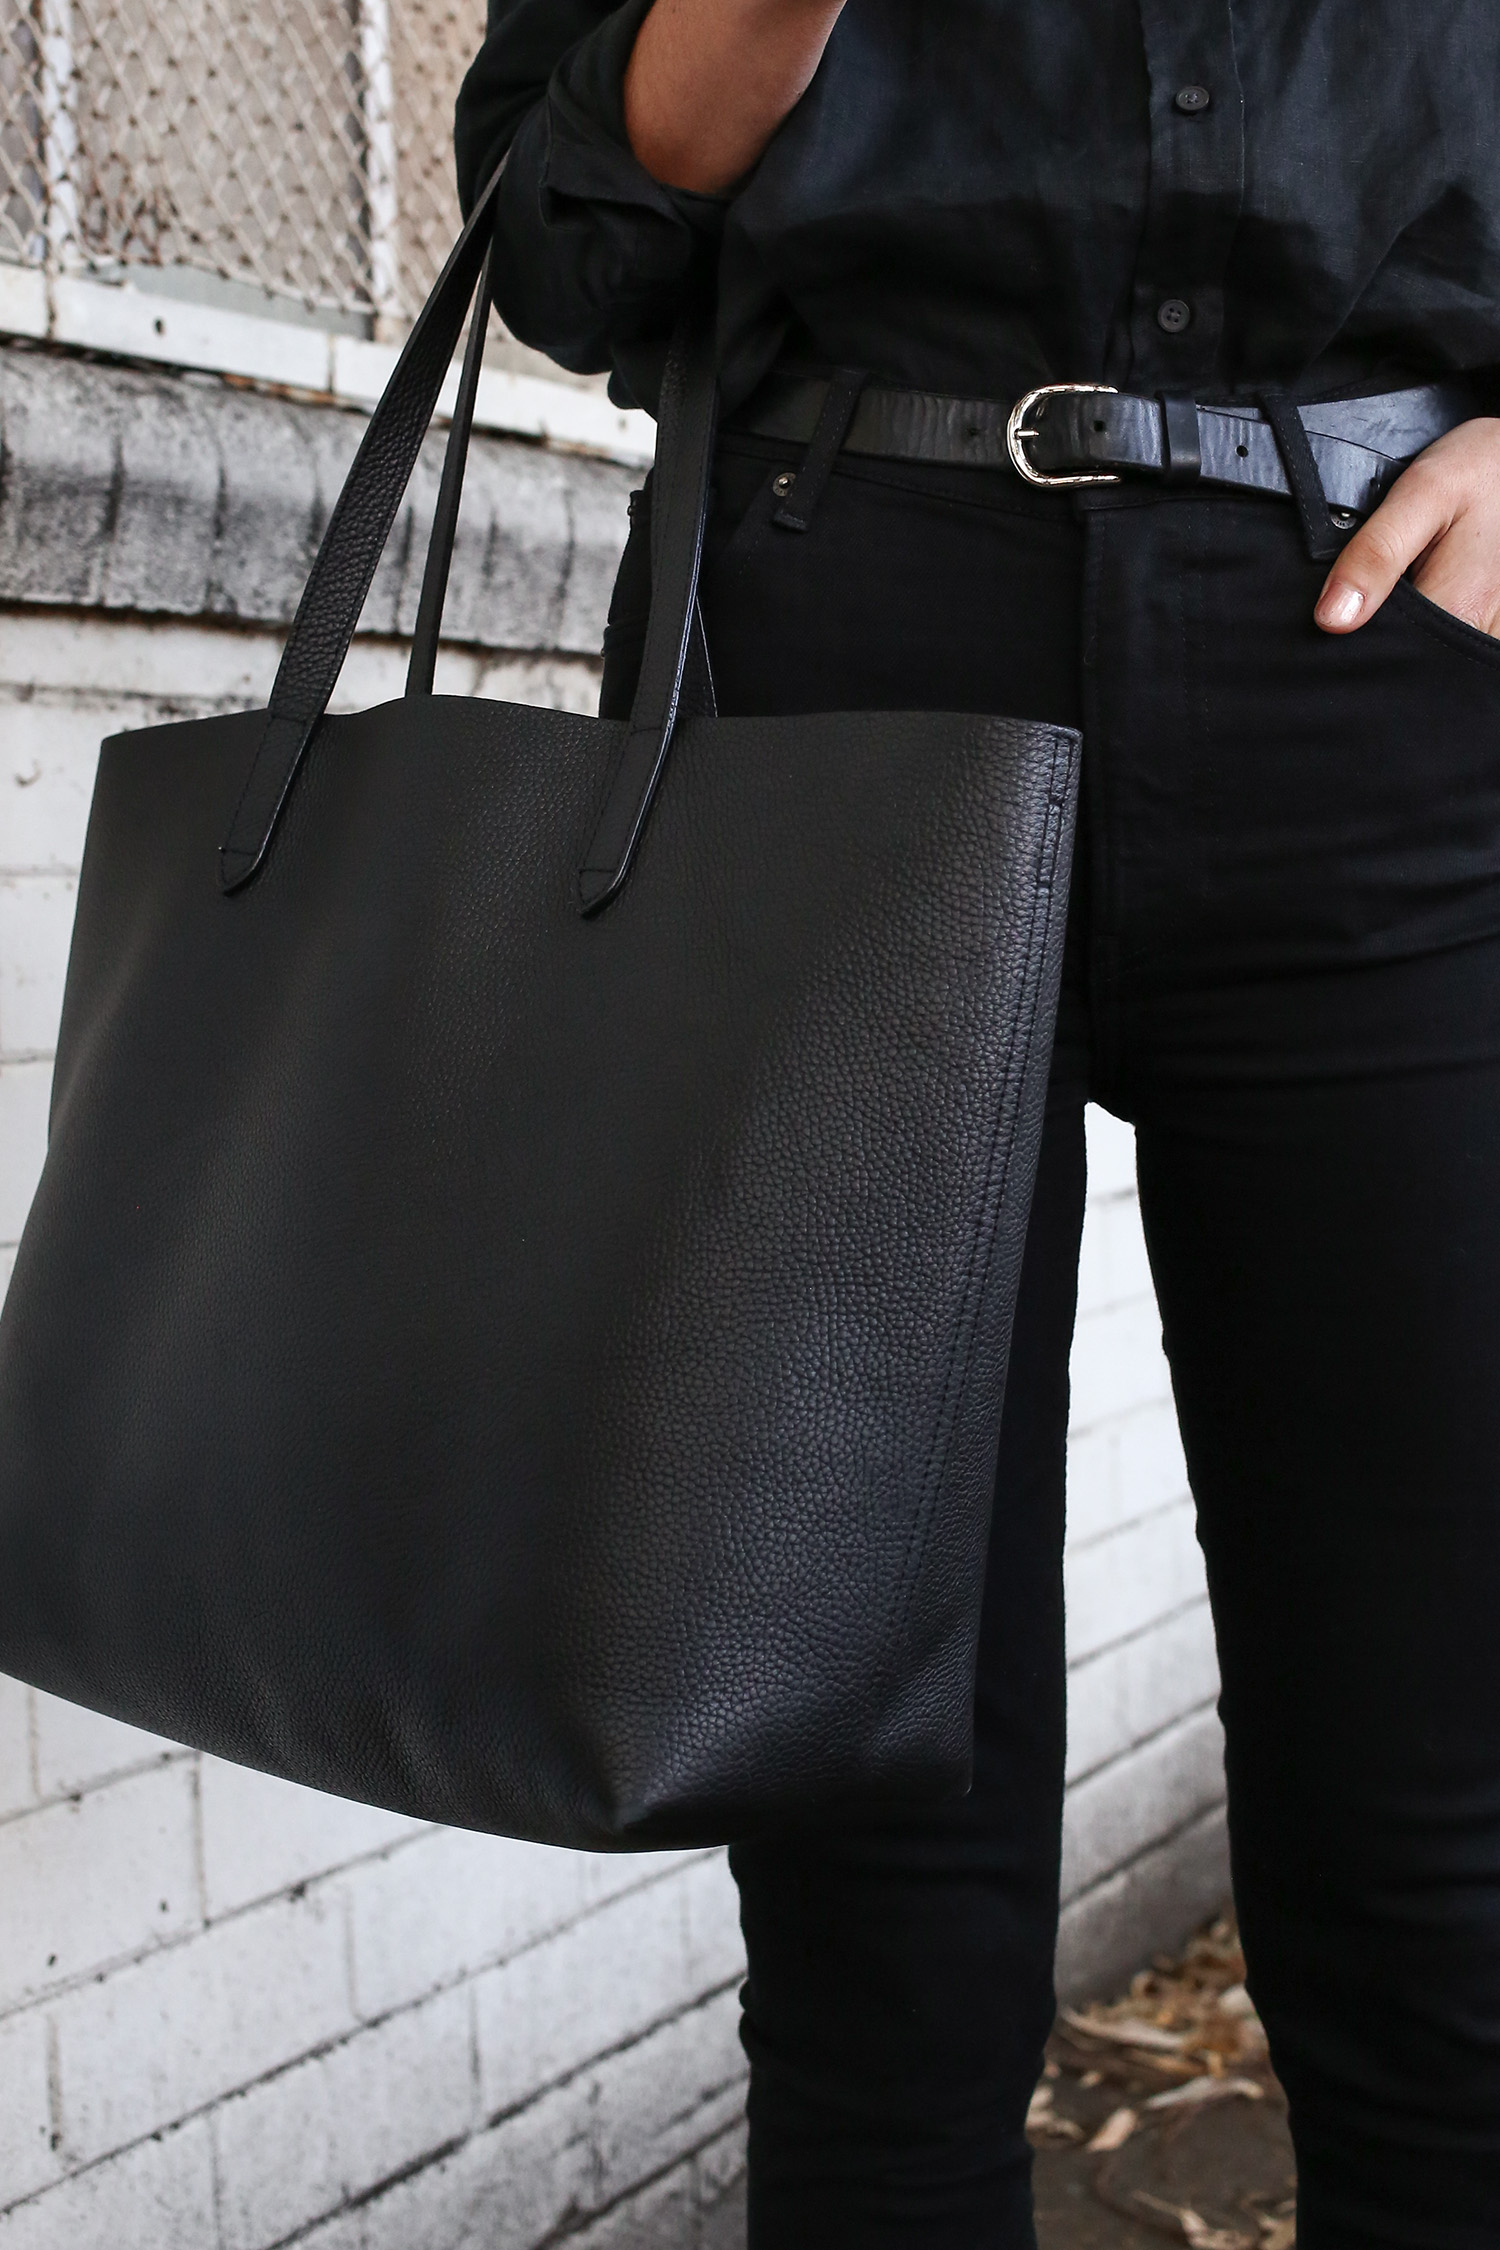 My New Black Tote With An All-Black Outfit